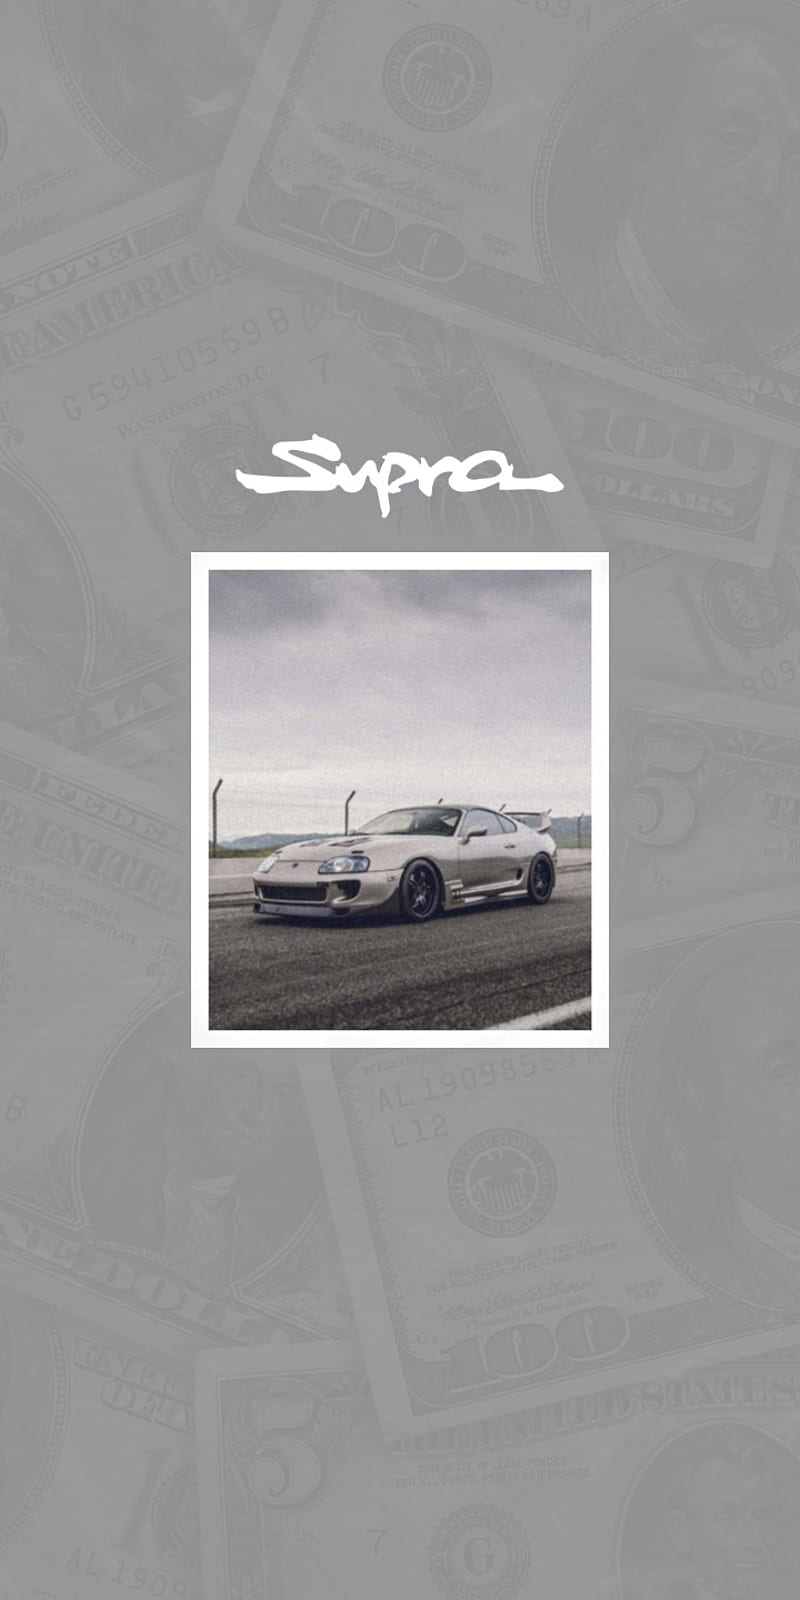 Toyota Supra Iphone iPhone Wallpapers Free Download